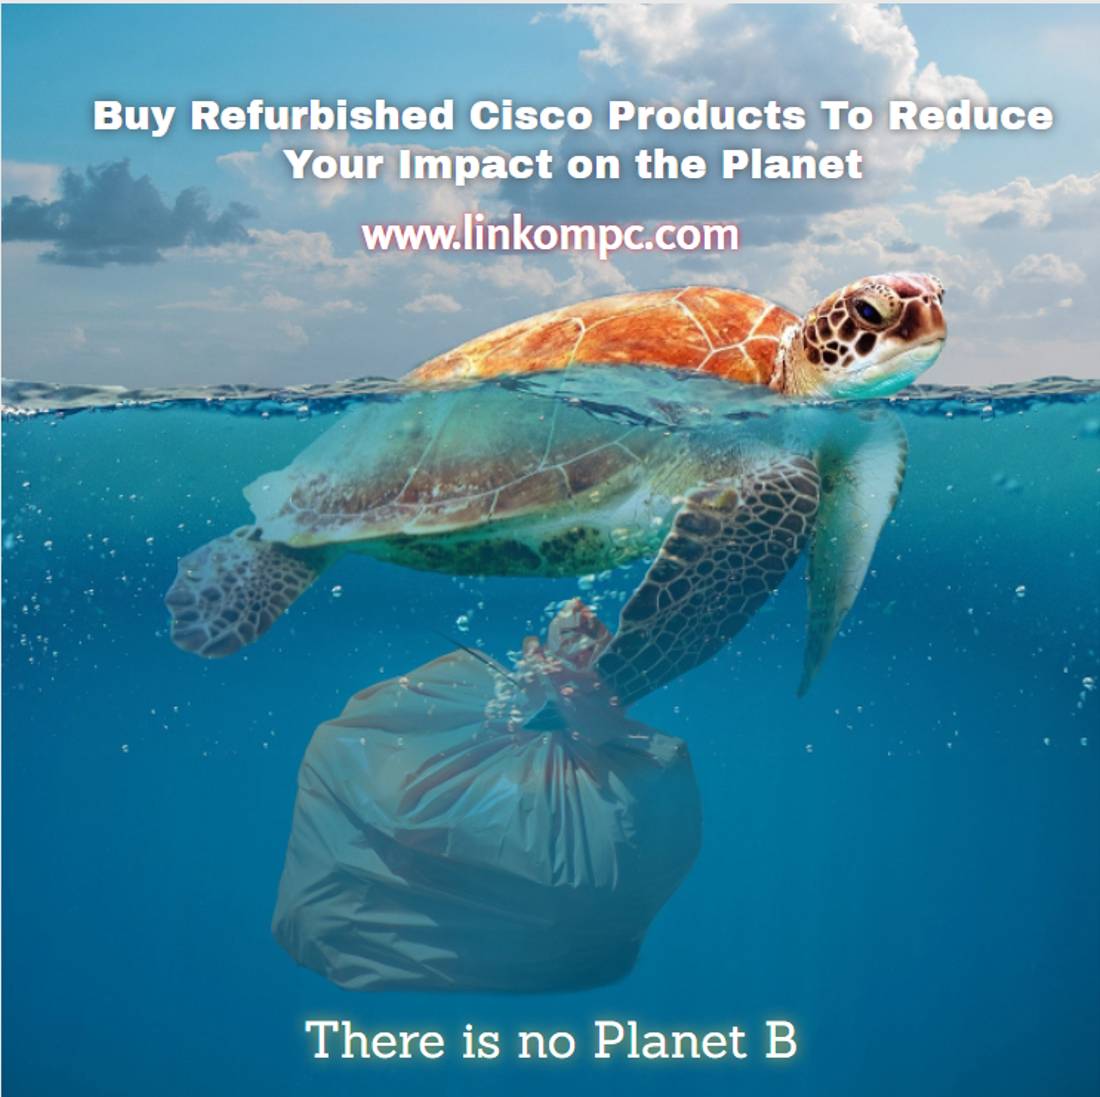 Buy Refurbished Cisco Products To Reduce Your Impact on the Planet